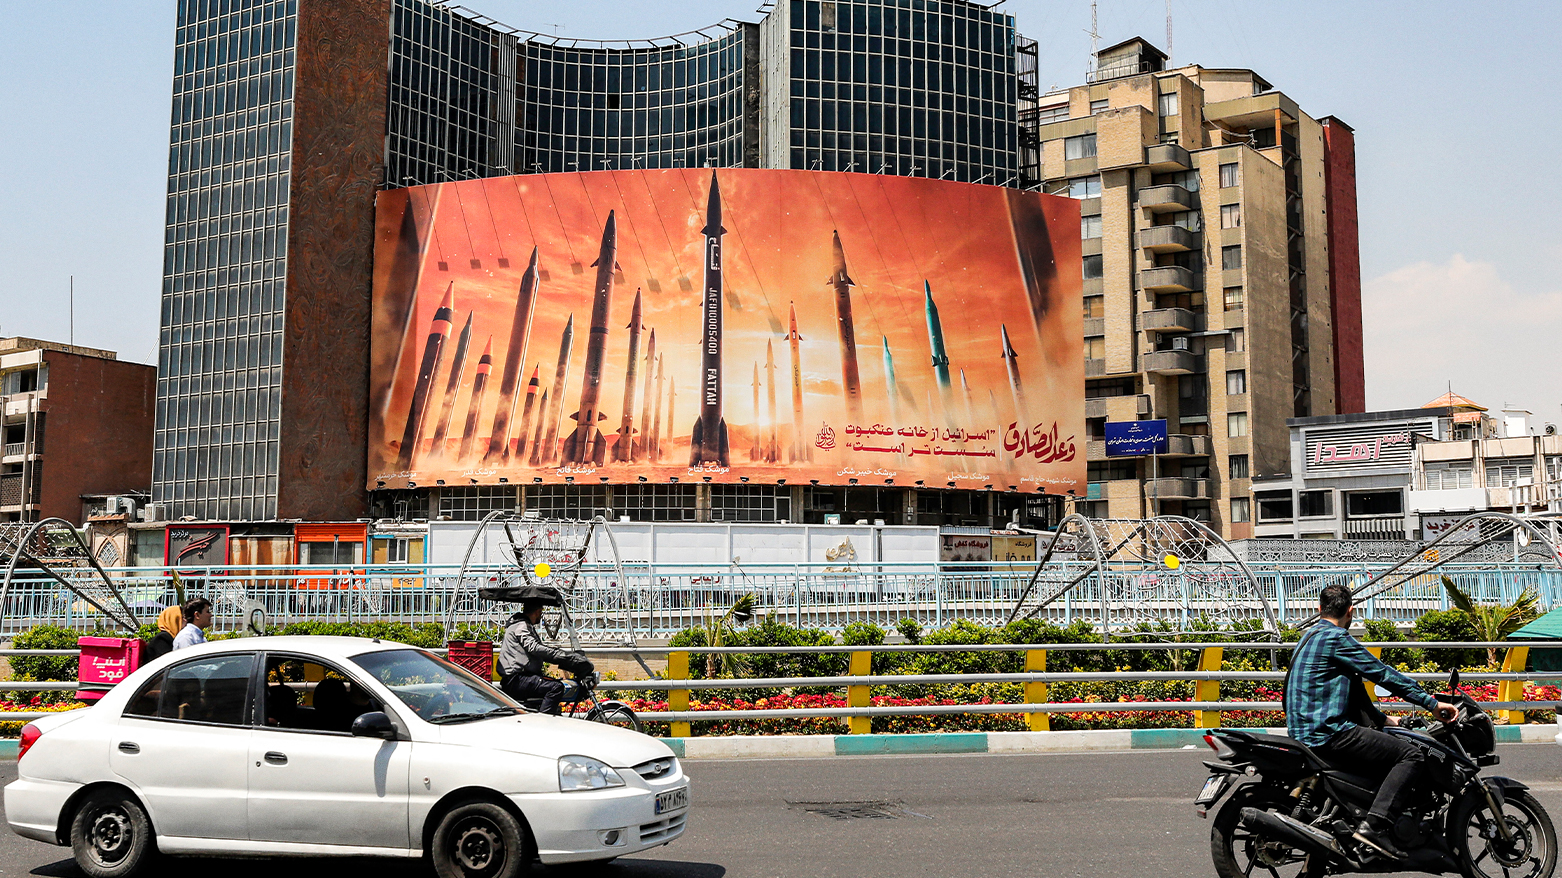 Motorists drive their vehicles past a billboard depicting named Iranian ballistic missiles in service. (Photo: AFP)